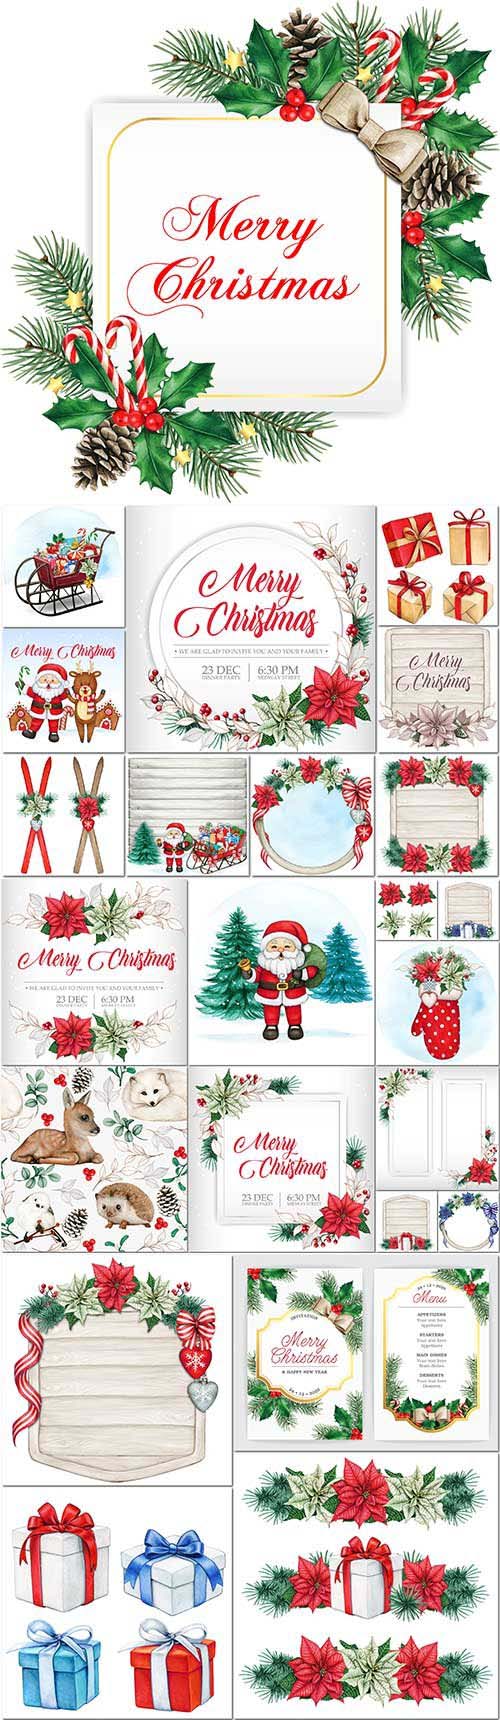 Hand drawn Merry christmas and happy new year poster vector